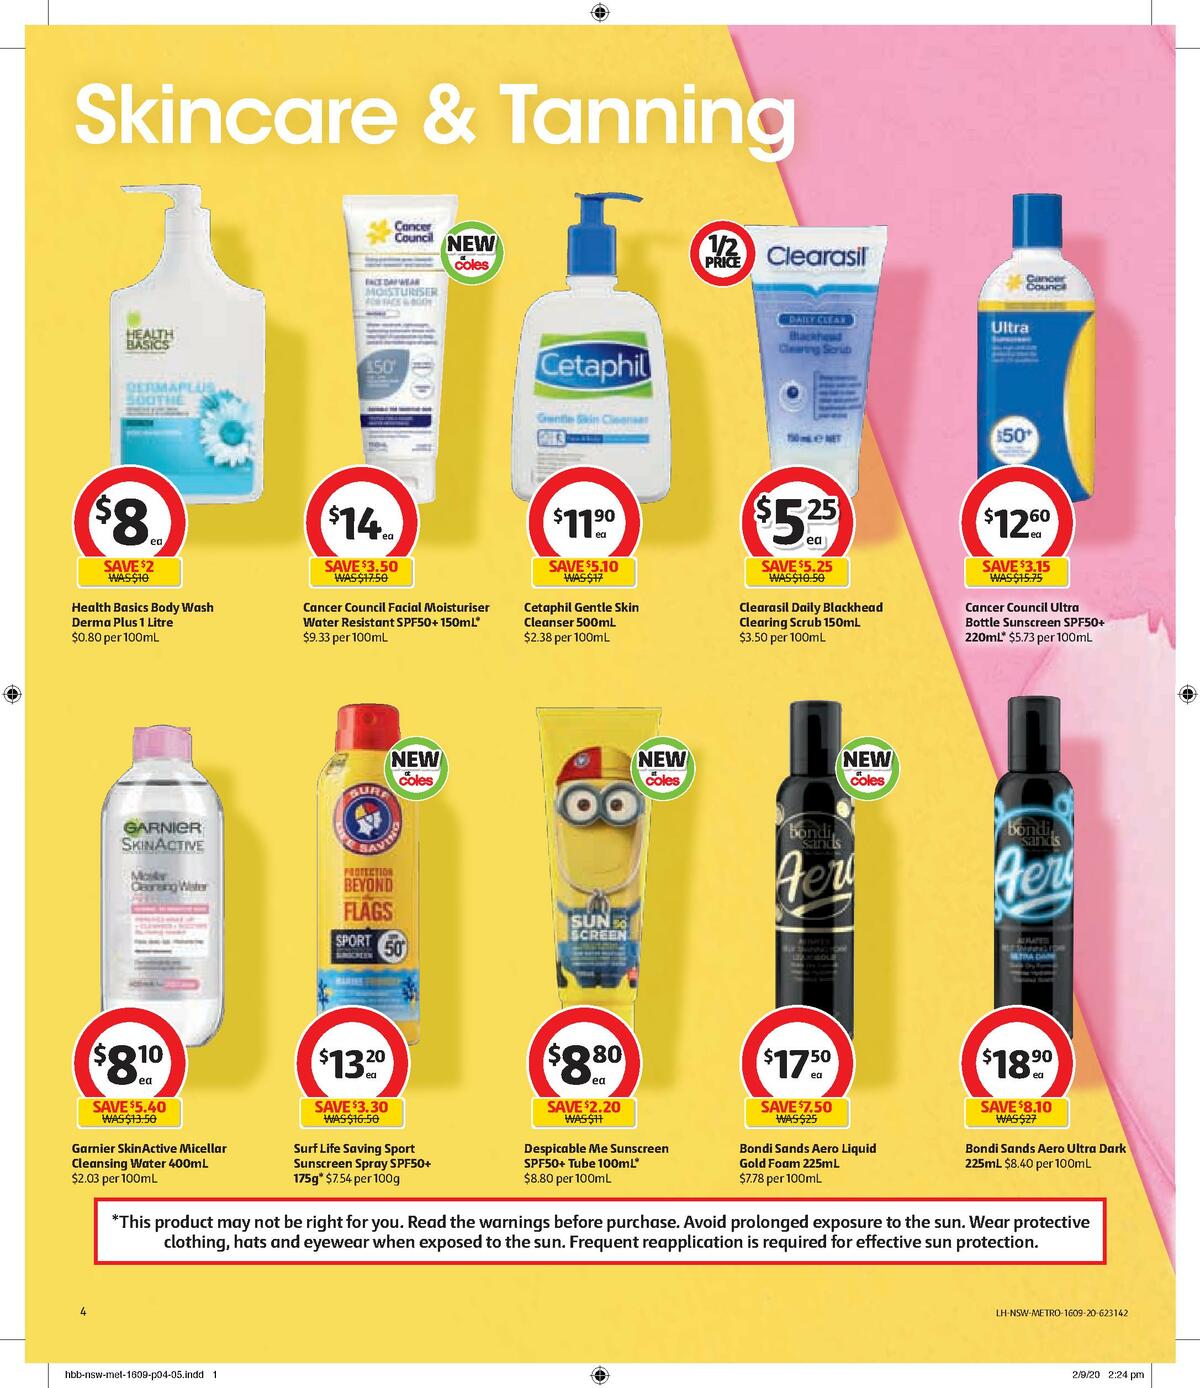 Coles Health & Beauty Catalogues from 16 September